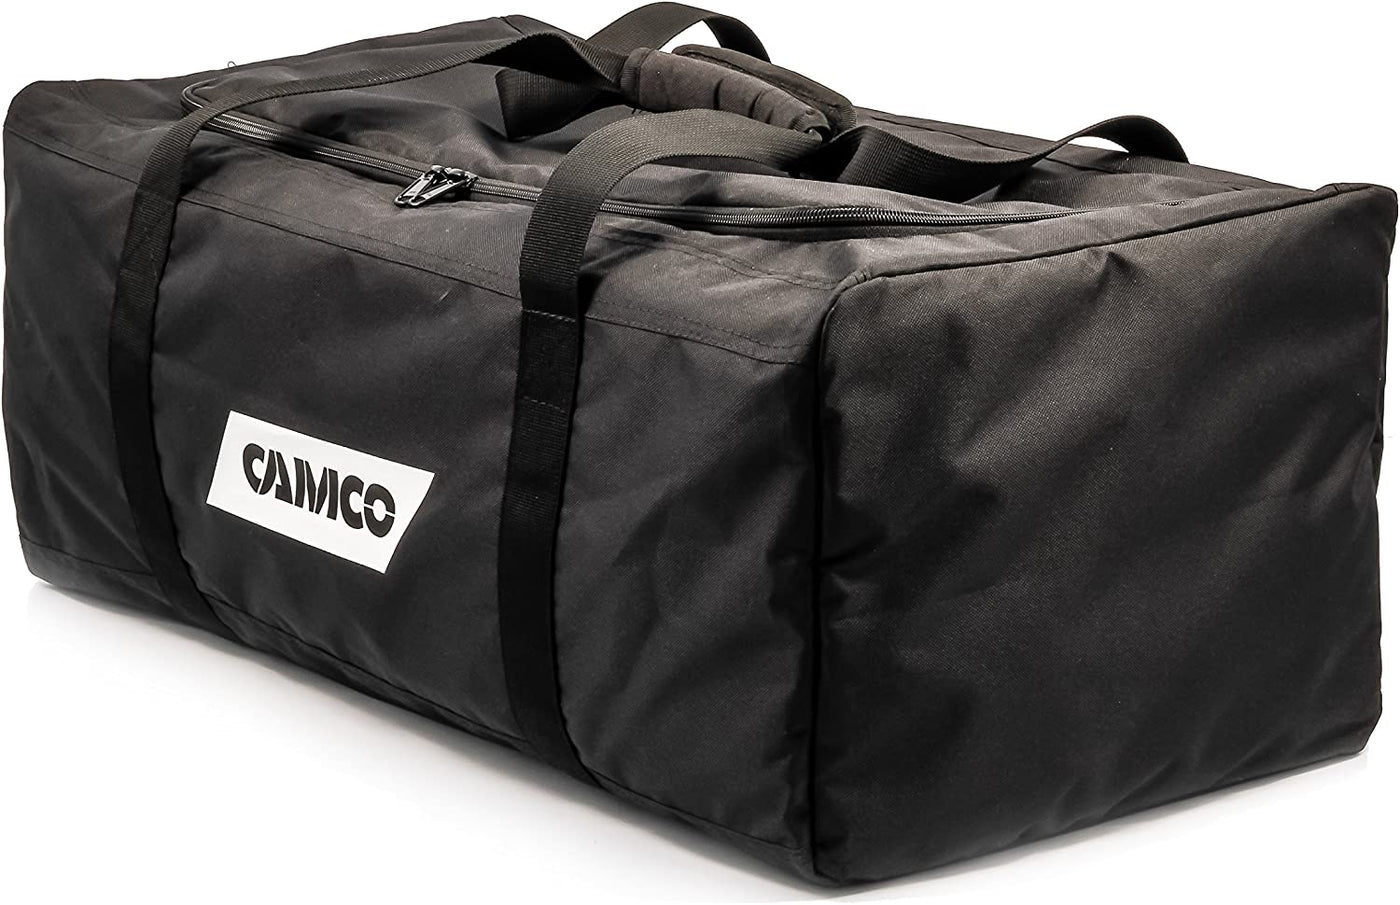 Camco 44550 RV Stabilization Kit w / Duffle - Deluxe Bilingual